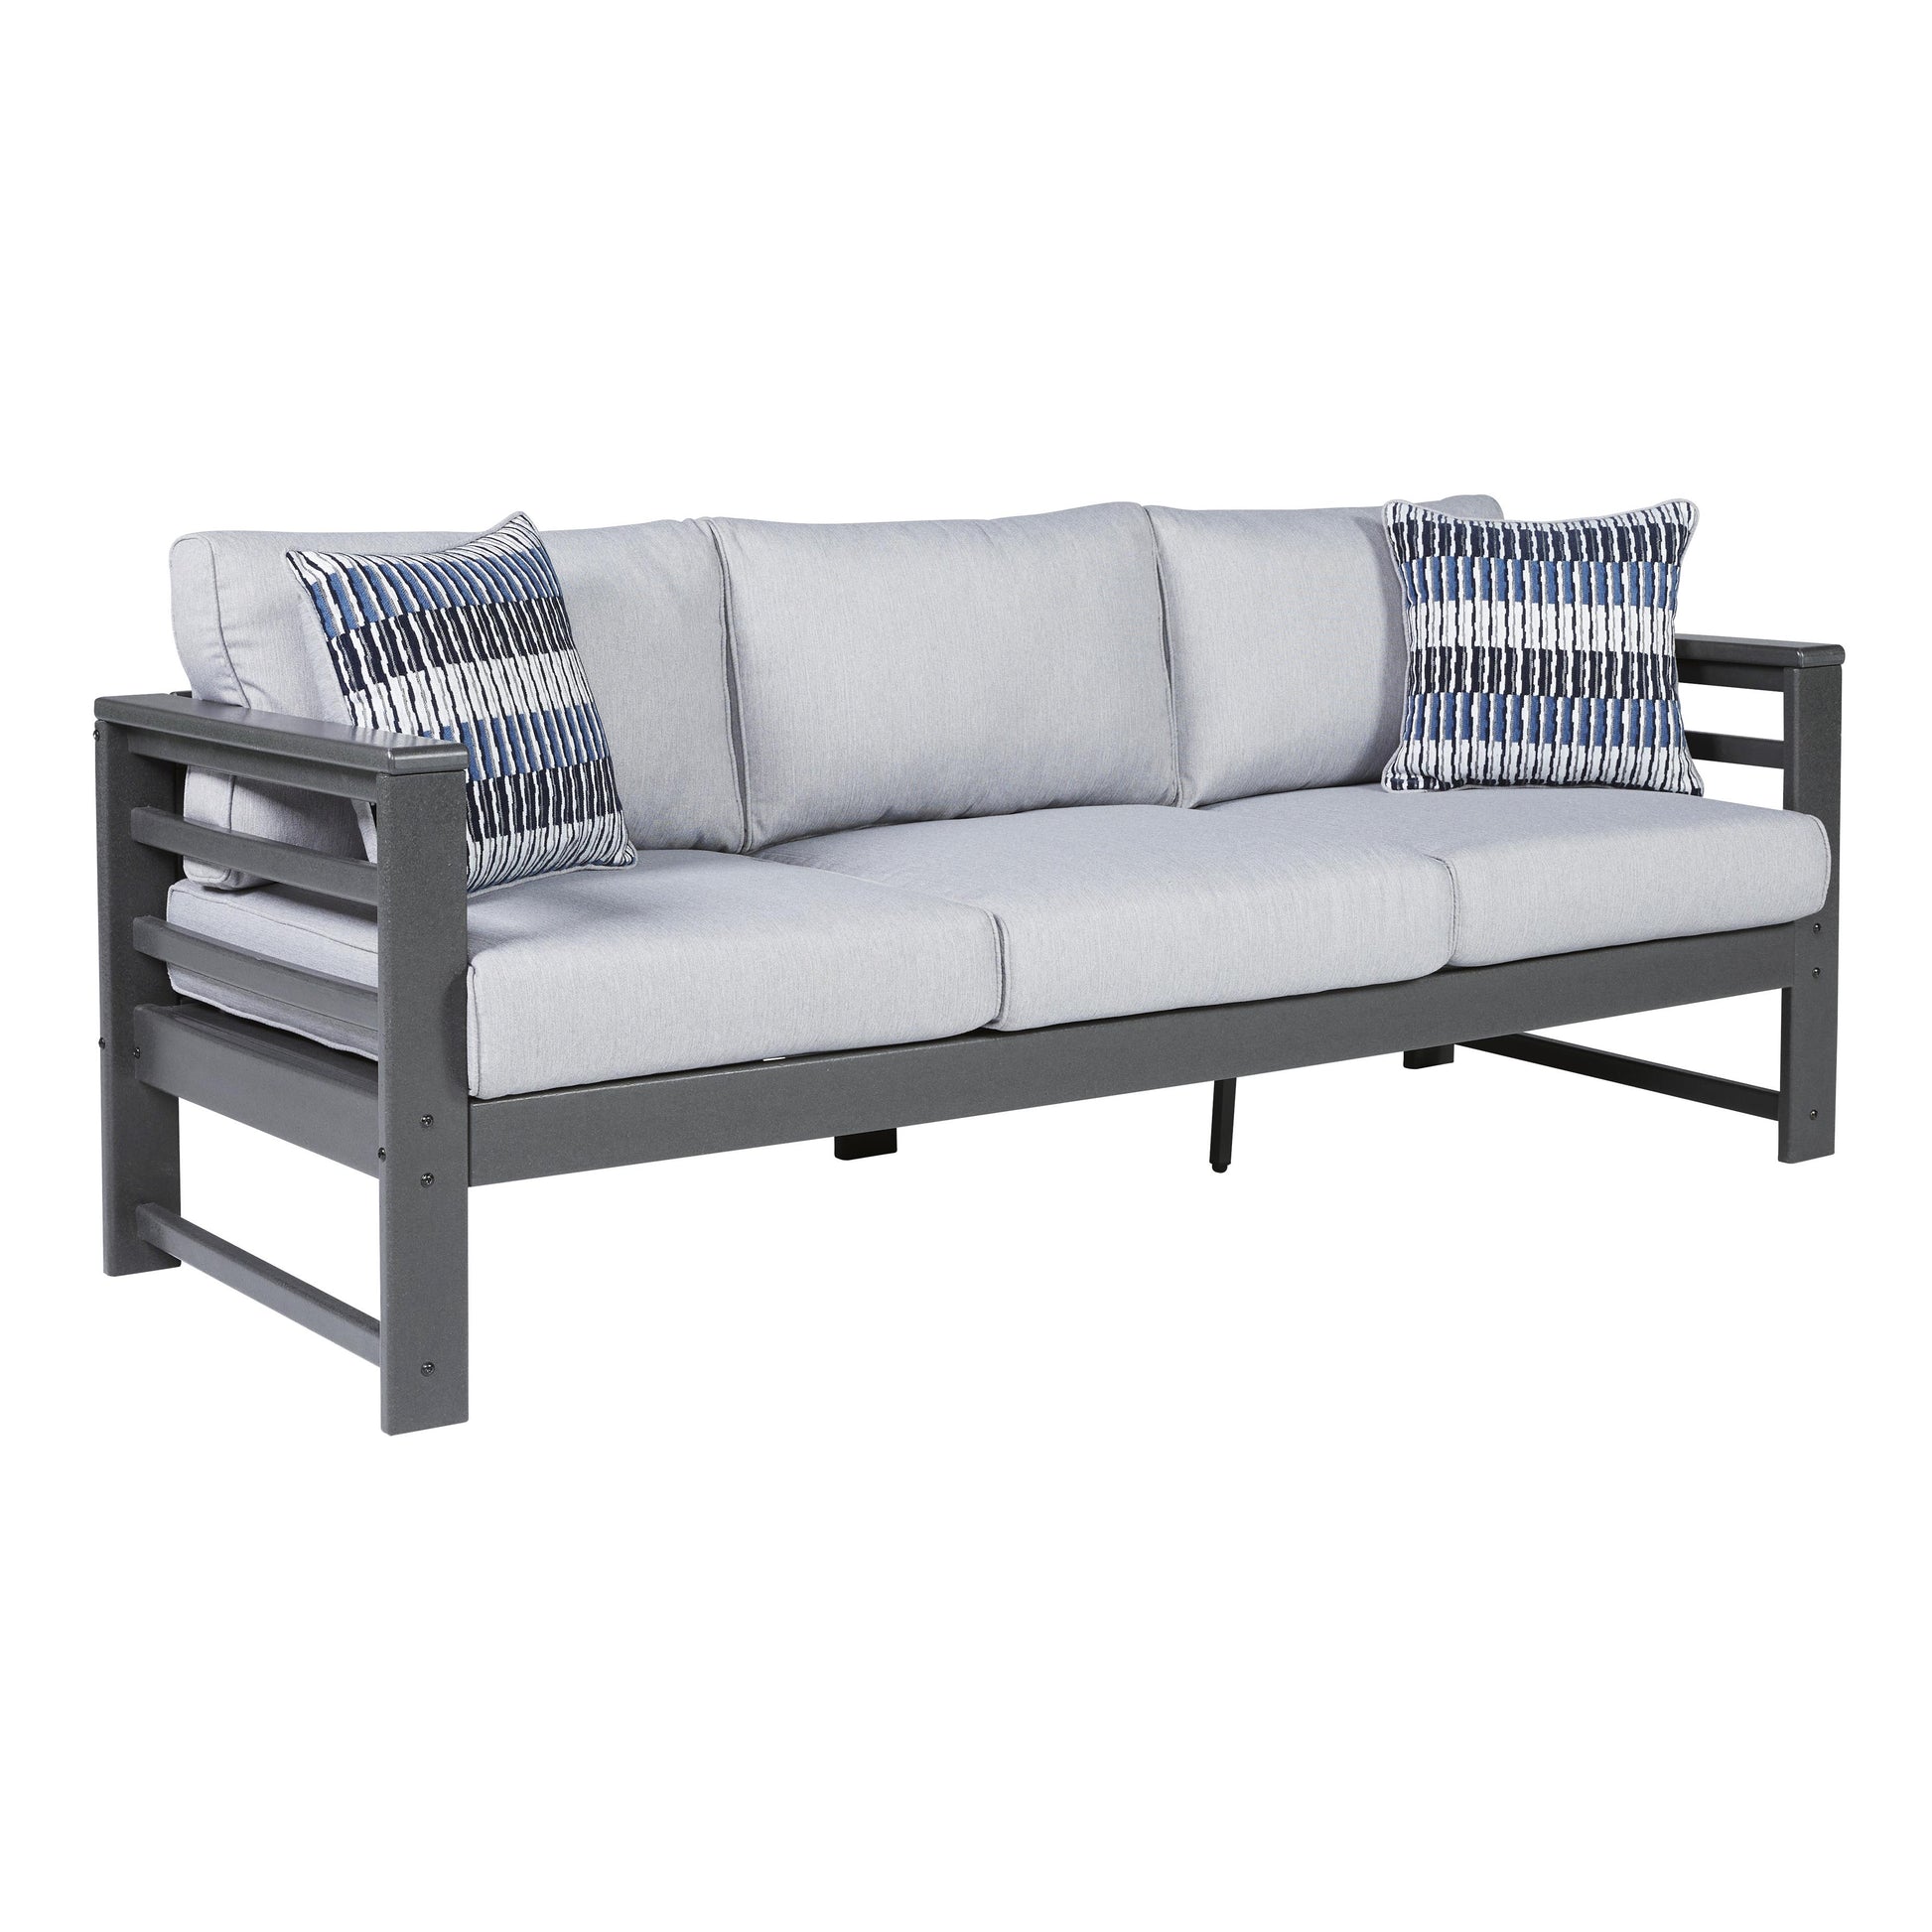 Signature Design by Ashley Outdoor Seating Sofas P417-838 IMAGE 1